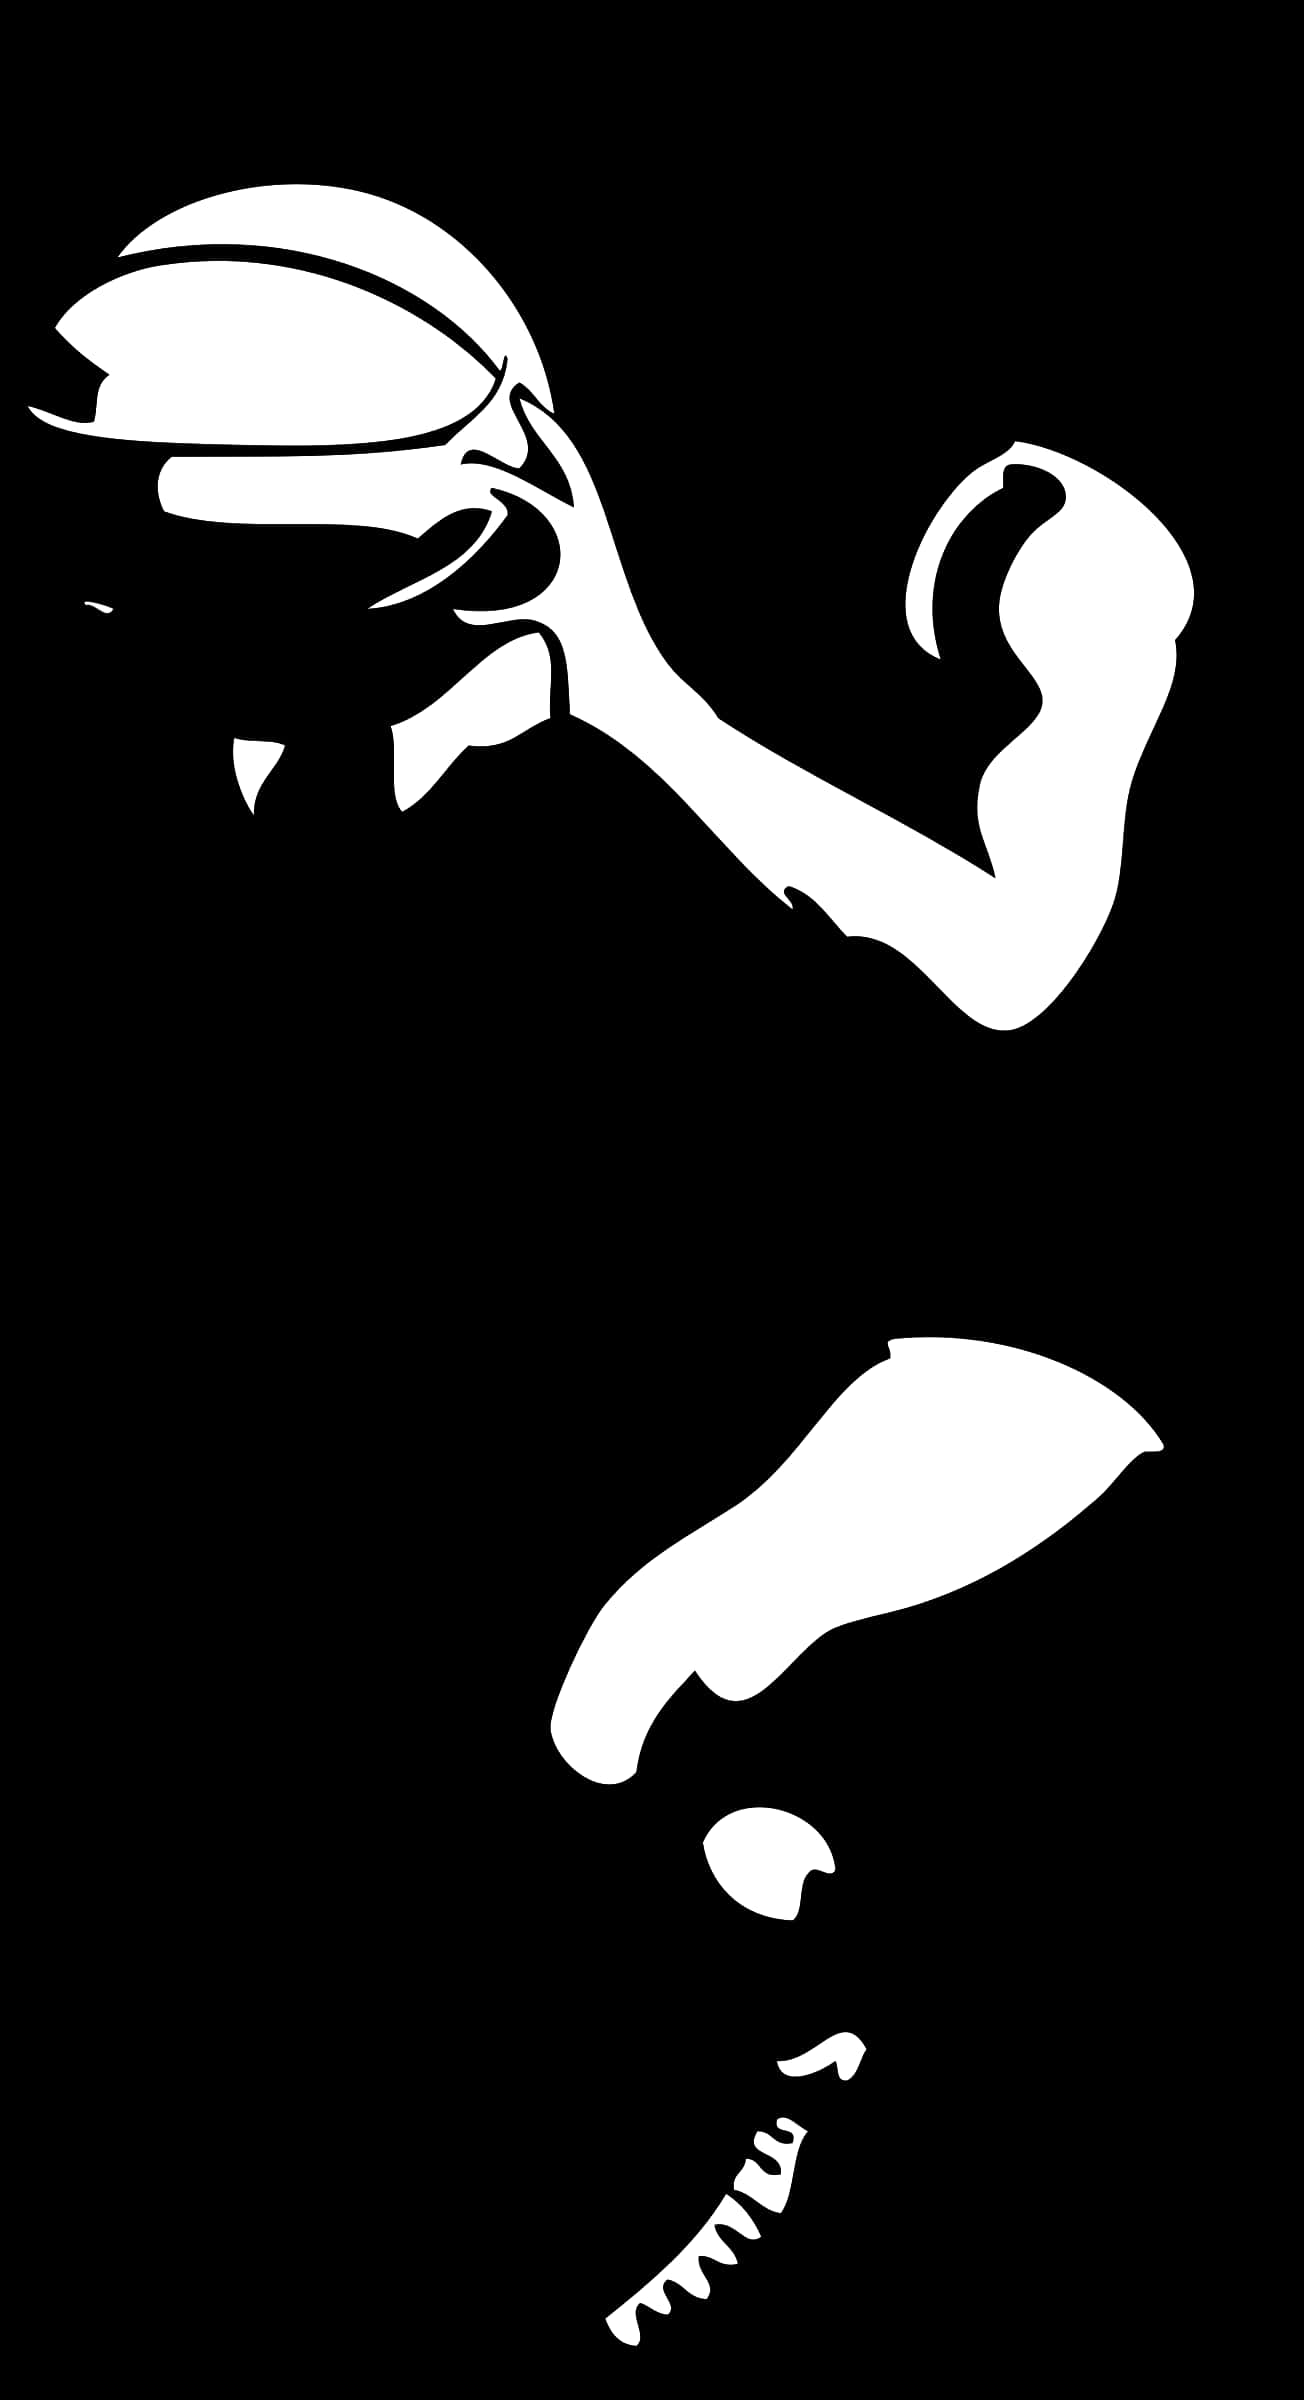 Free Black And White Basketball Png - Basketball Player Clip Art, Transparent Png